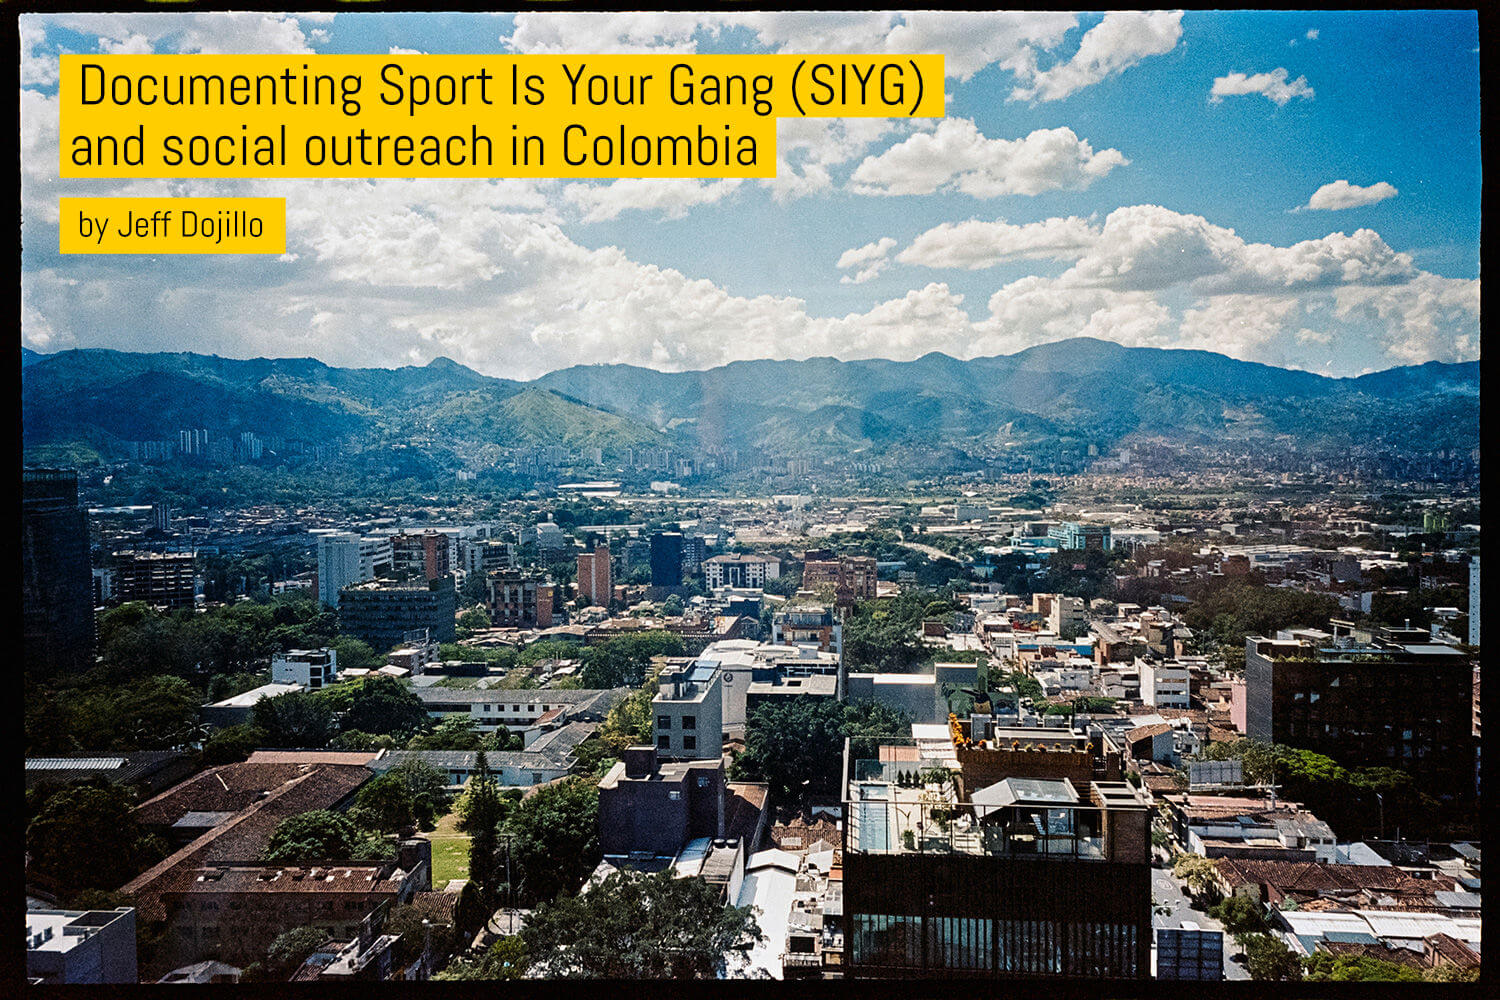 Documenting Sport Is Your Gang (SIYG) and social outreach in Colombia